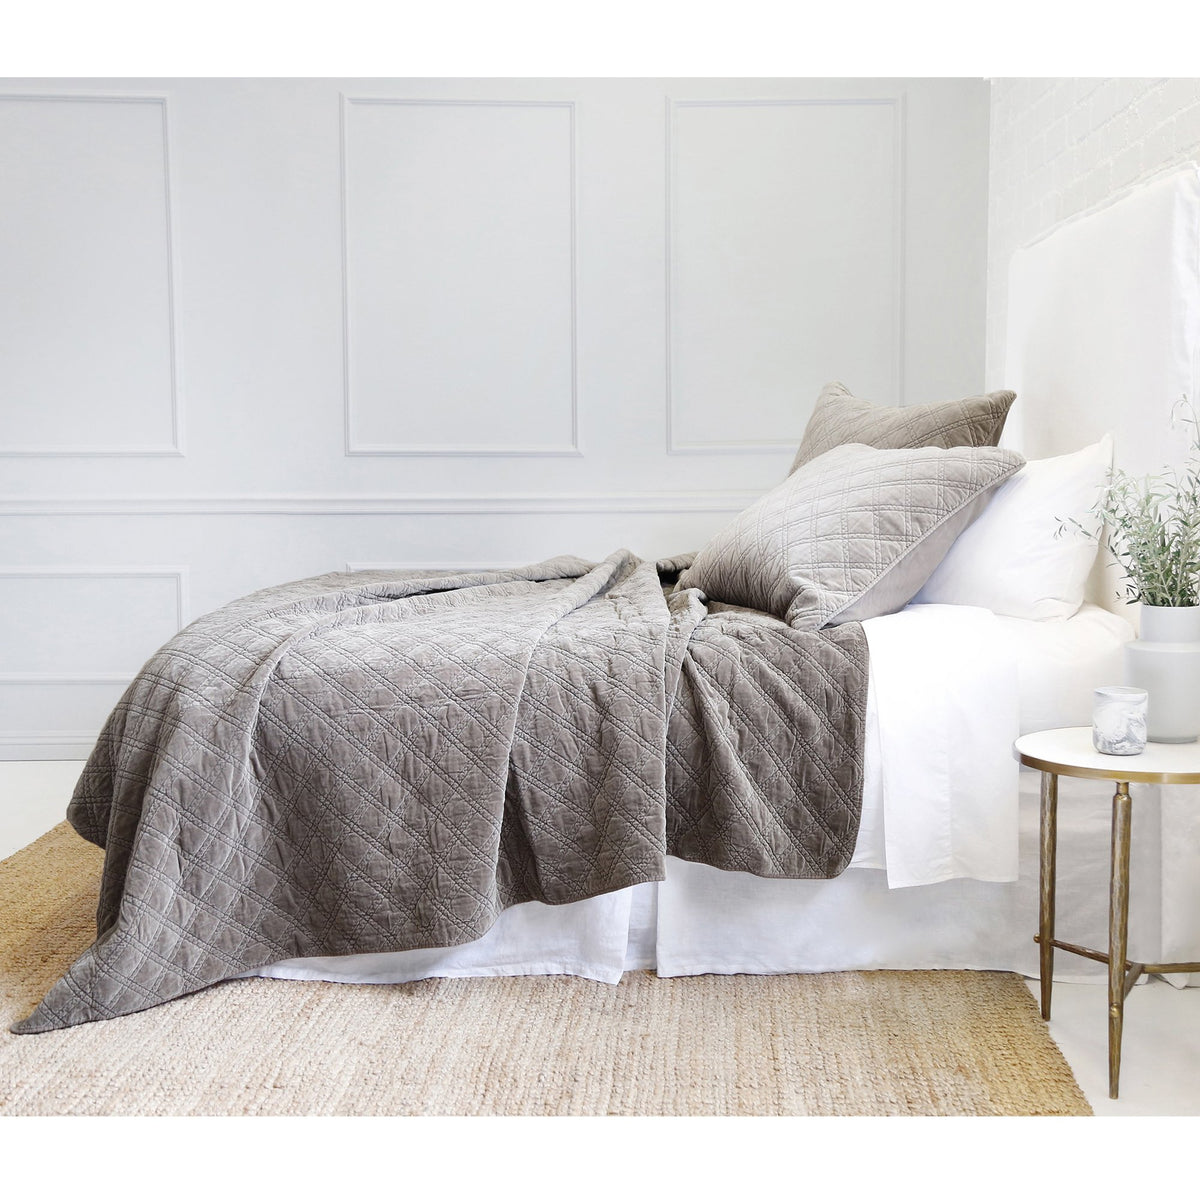 POM POM BRUSSELS COVERLET COLLECTION - PEWTER